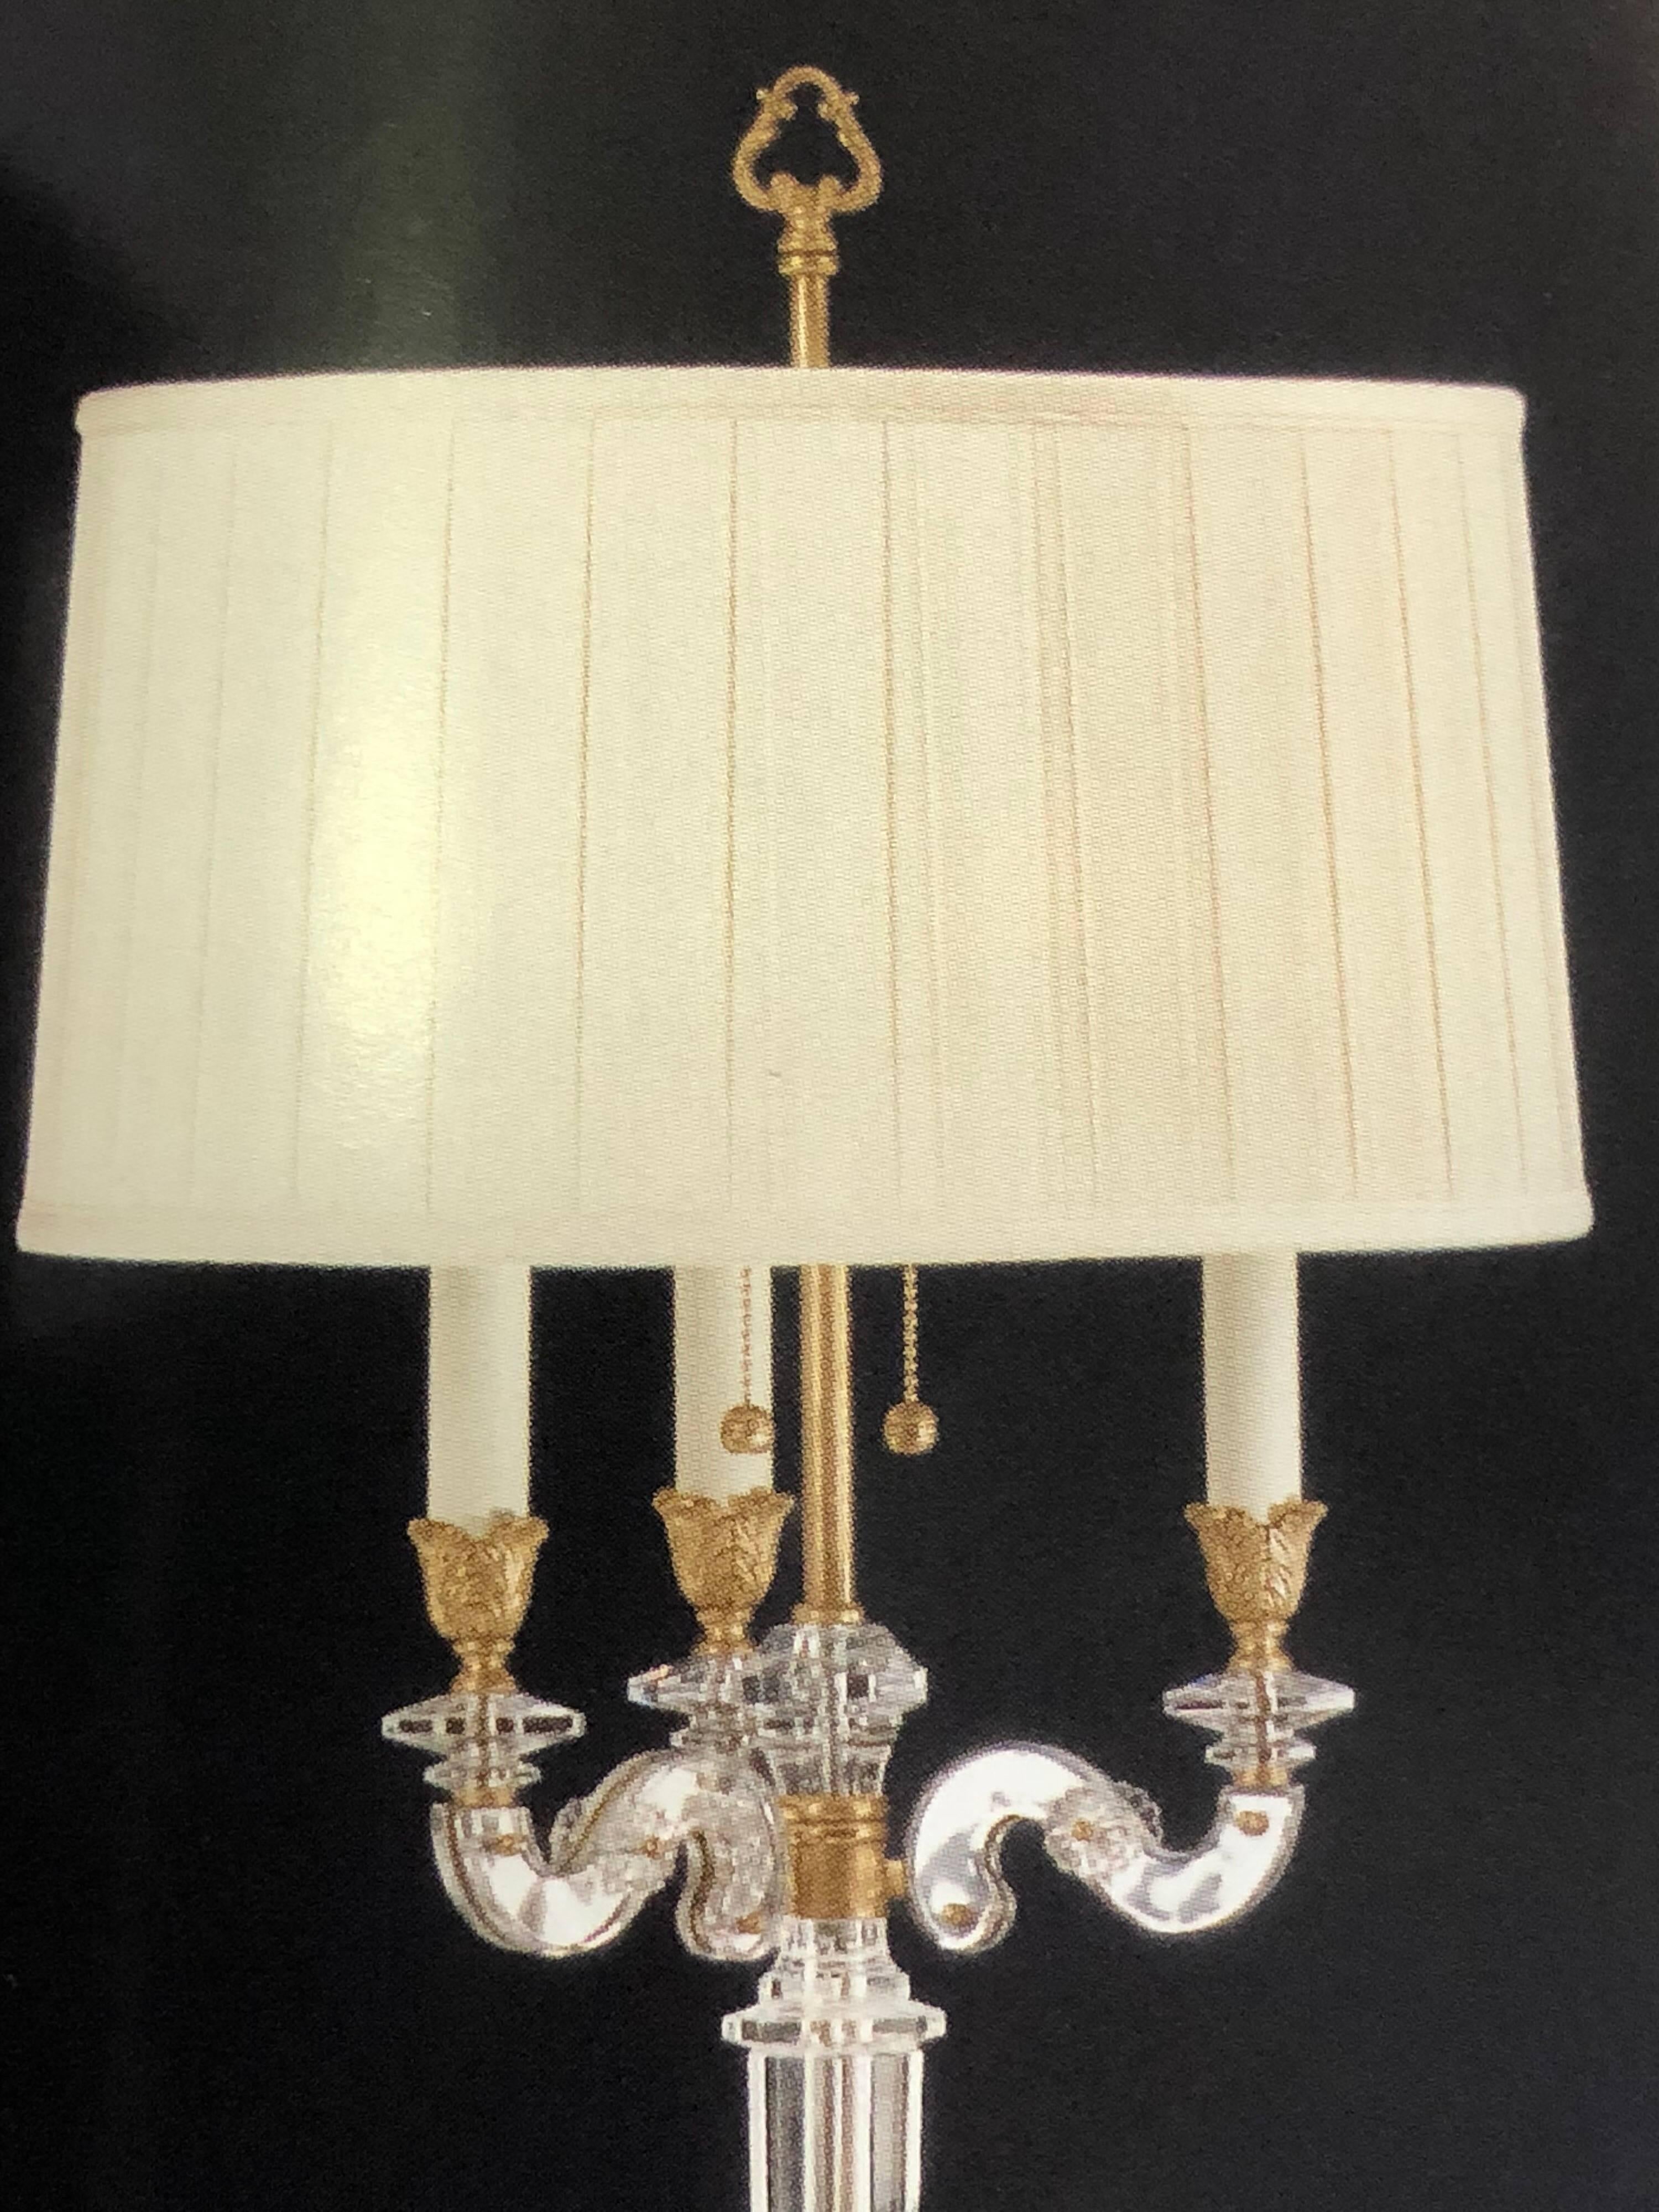 Two Italian Mid-century Style modern neoclassical solid crystal and antiqued solid brass floor lamps in the style of Maison Baguès.

Two Edison sockets at 60 watts per socket; round pleated fabric shades are included. 

References: Venetian glass,